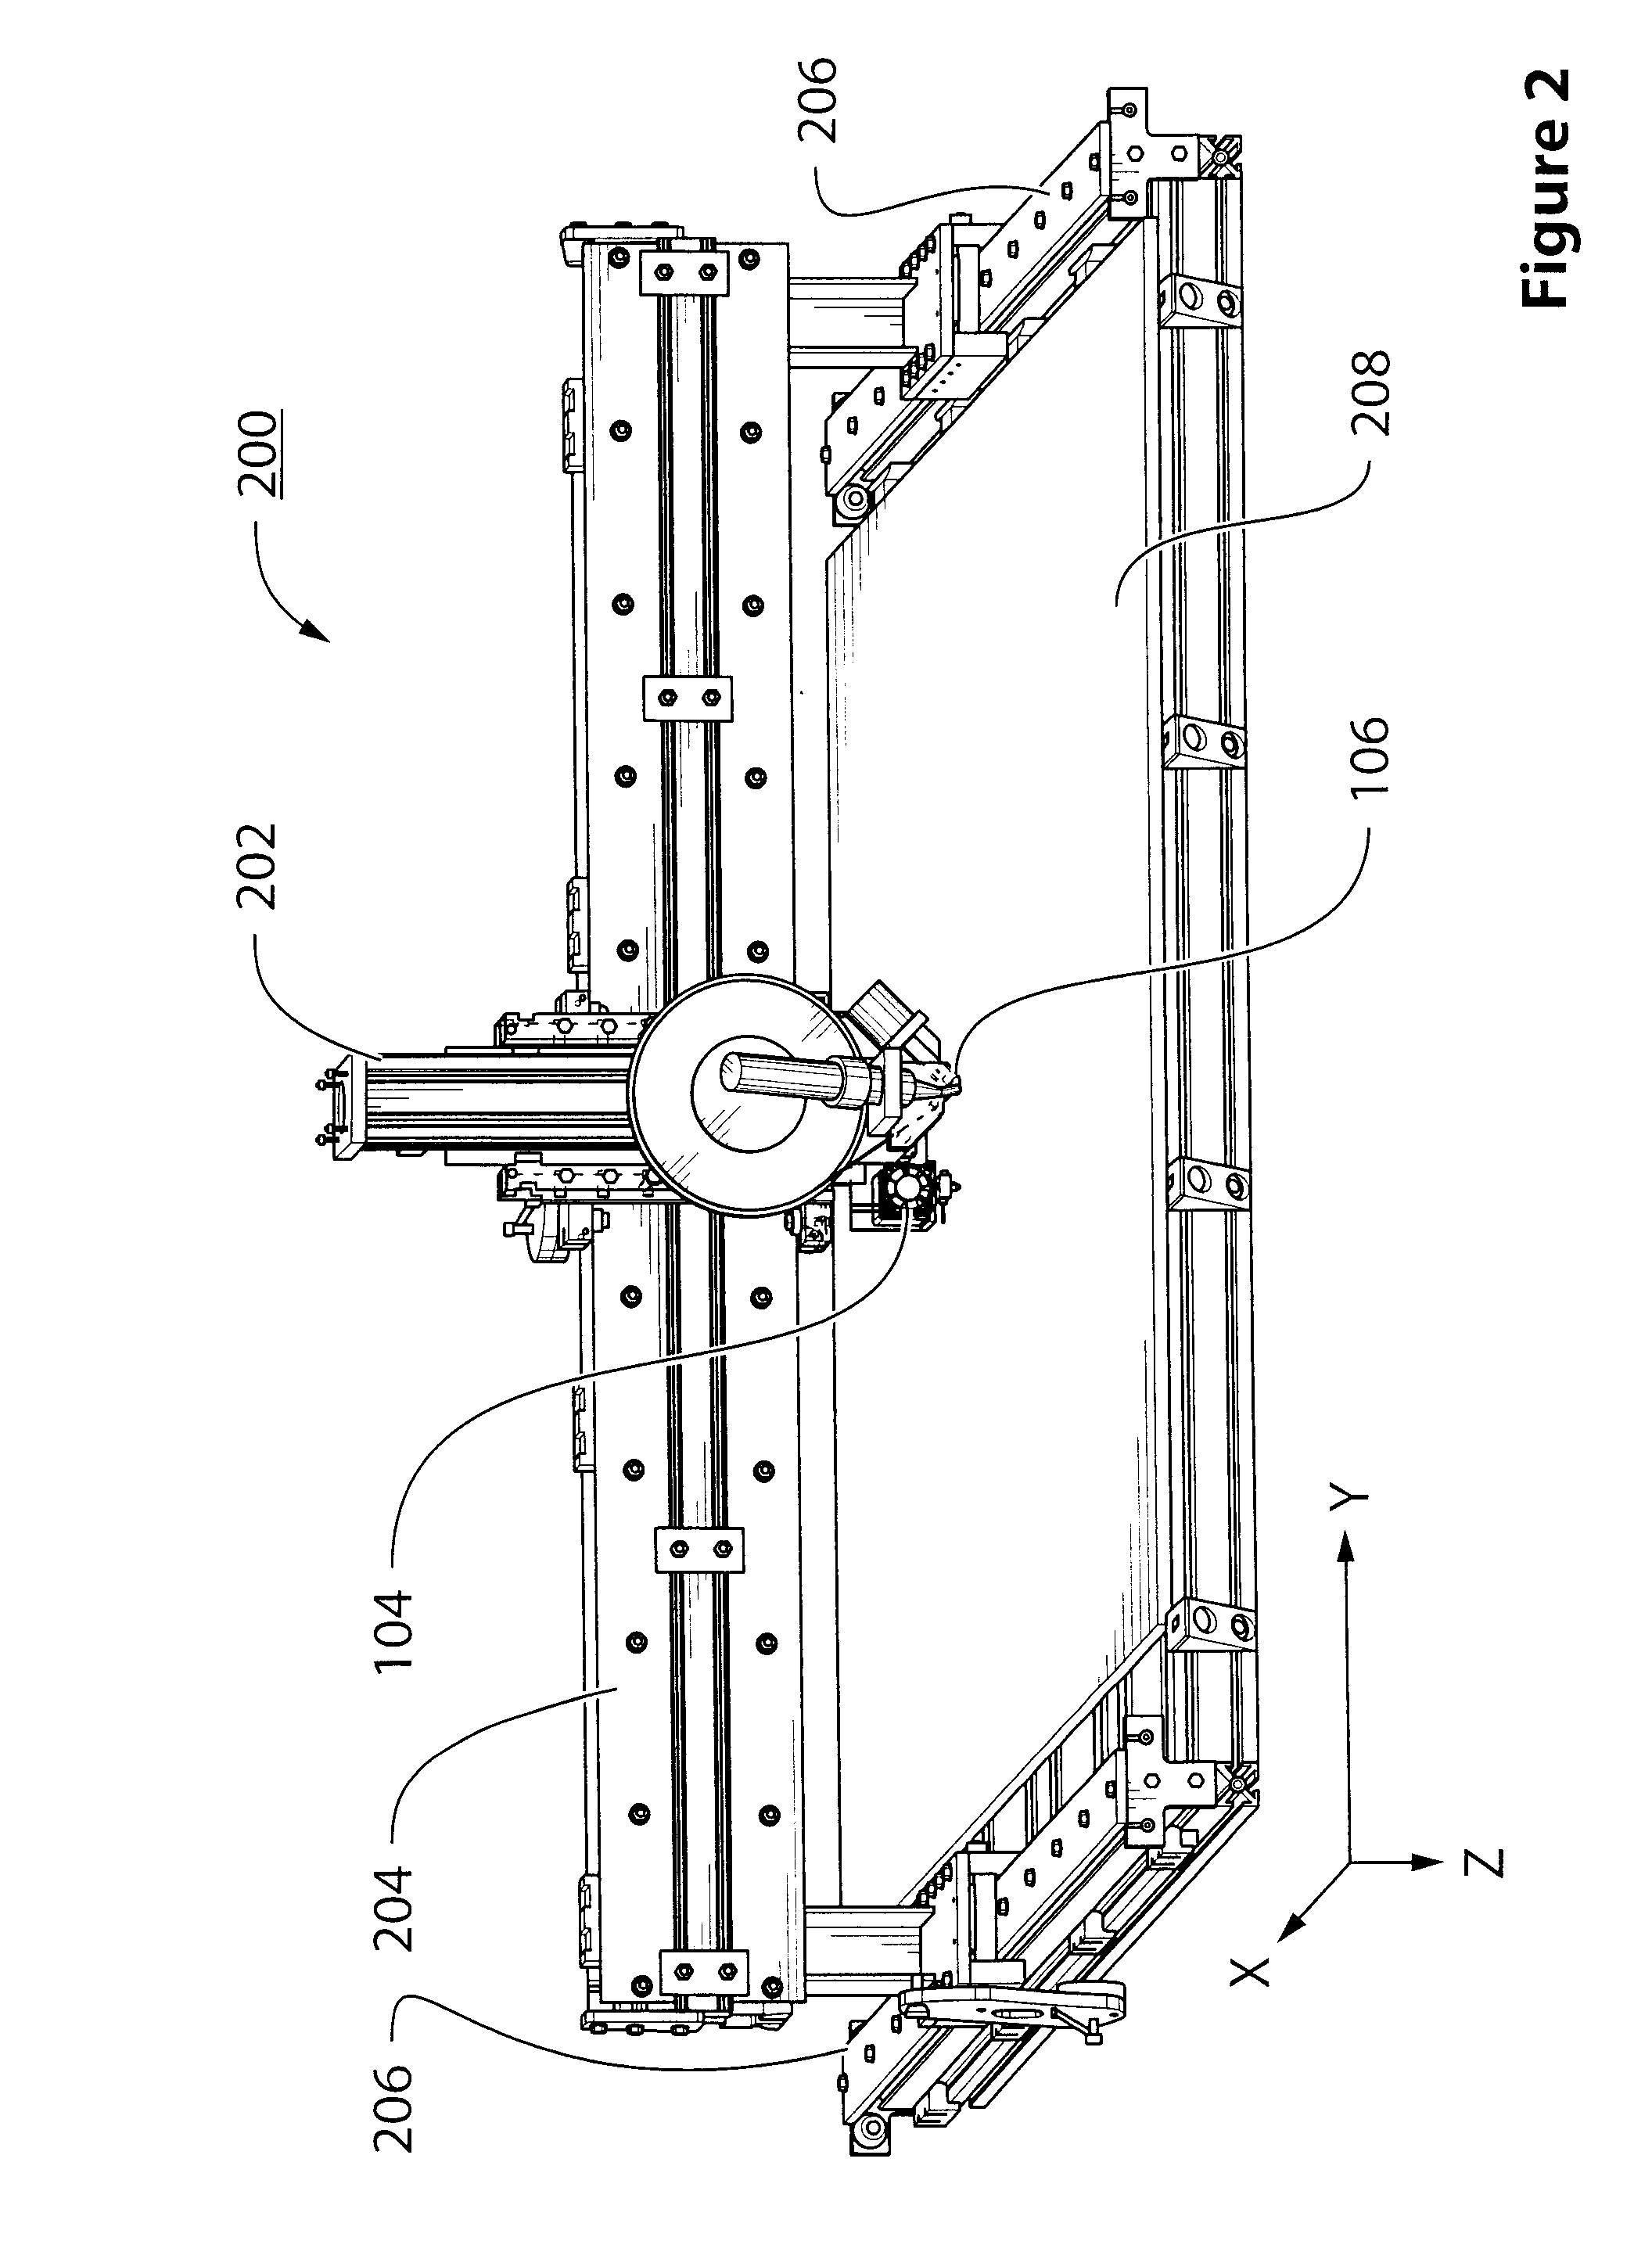 Apparatus and process for forming three-dimensional objects